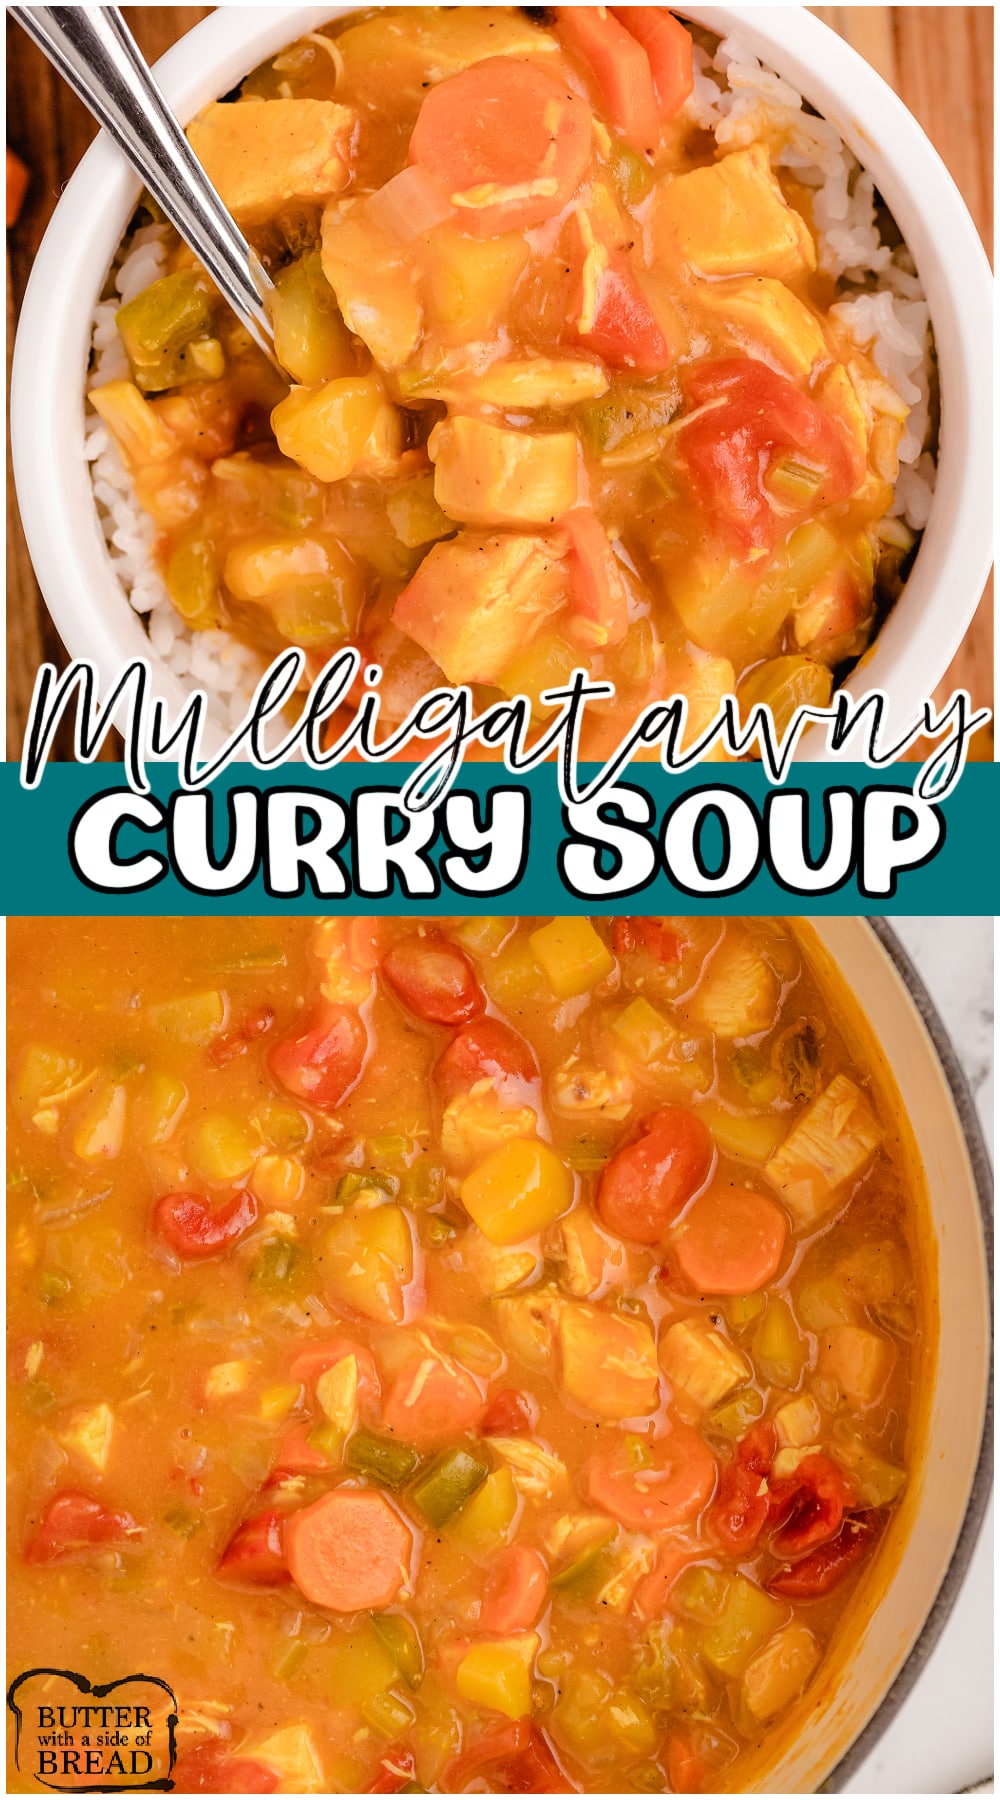 Mulligatawny soup made with curry chicken, packed with veggies, then served over rice. Comforting, sweet curry soup with great flavor!